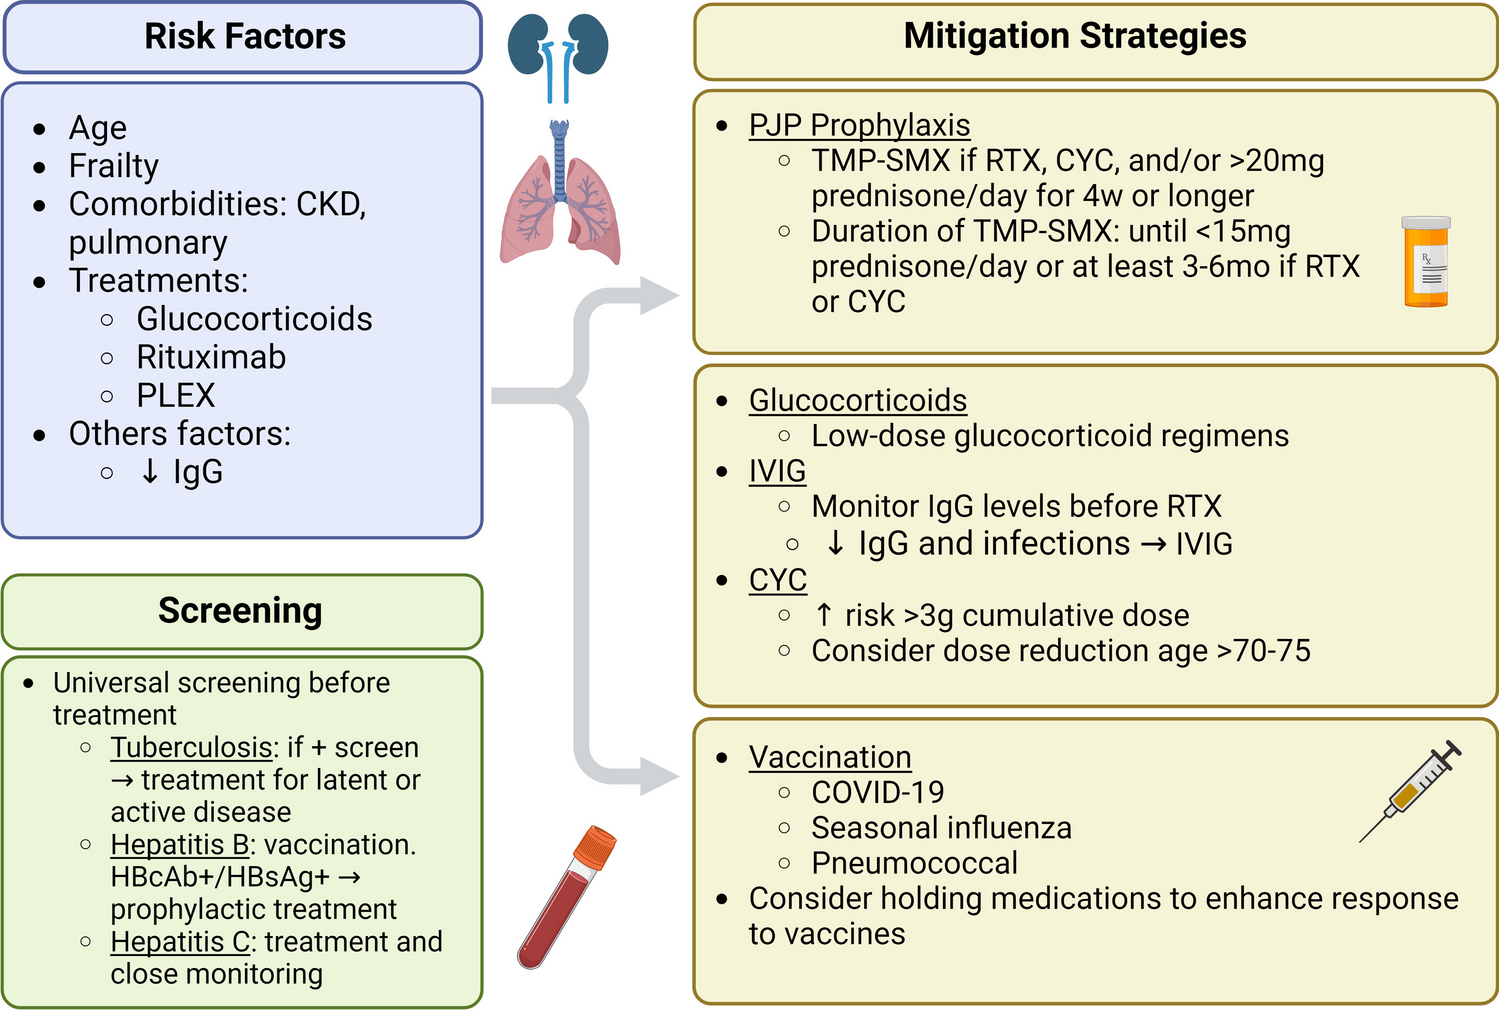 Current perspective on infections and mitigation strategies in primary systemic vasculitis